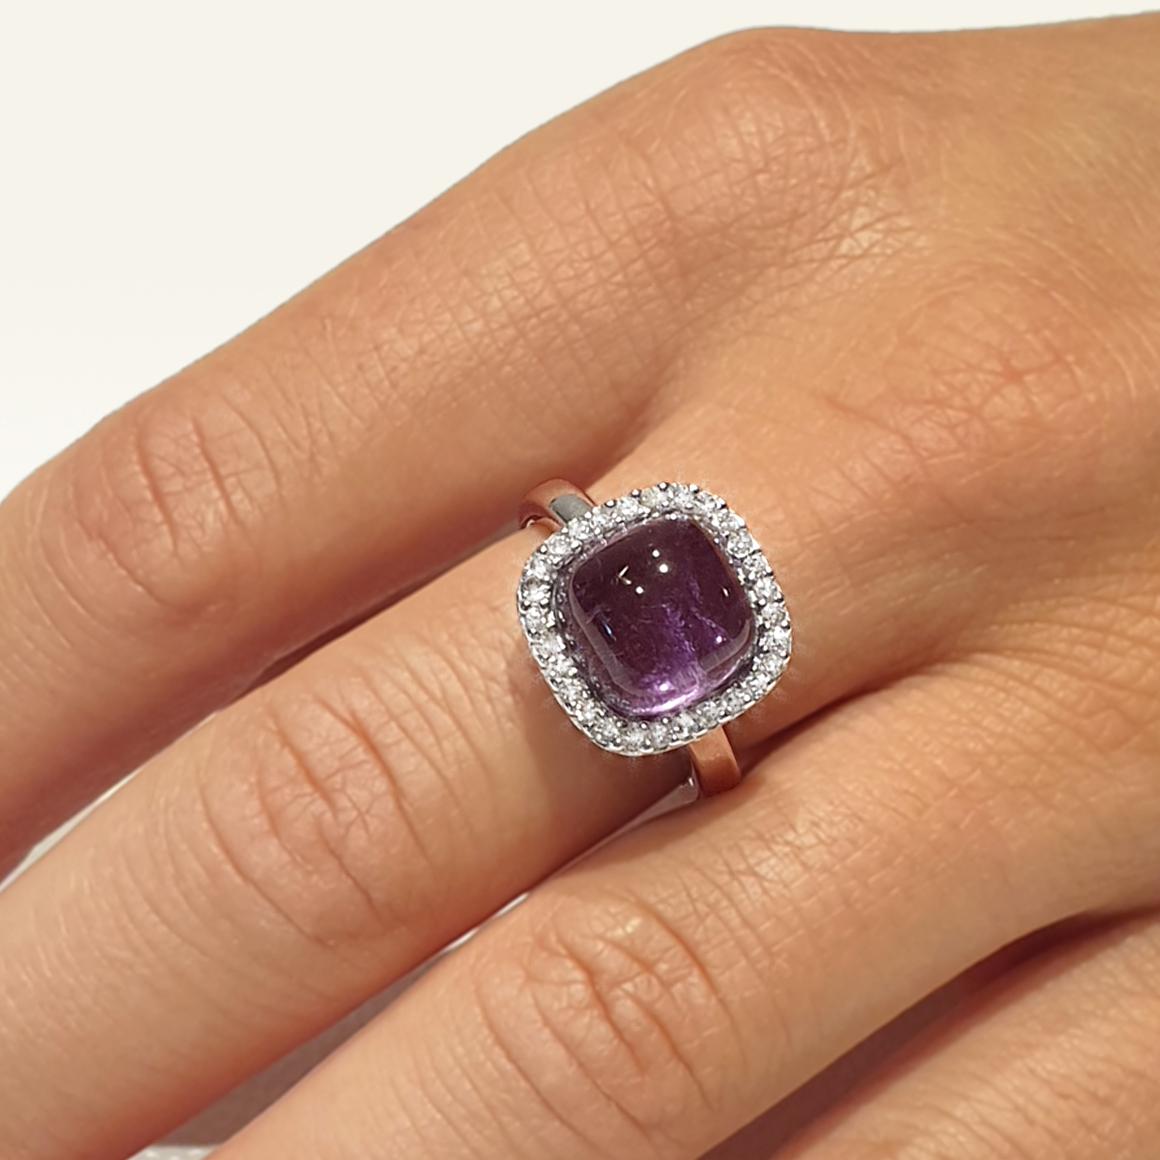 Ring in 18k white gold with Amethyst (square cabochon cut, size: 10x10 mm) and white Diamond cts 0,35 VS colour G/H.
 Beautiful colored stone that enhance the elegance and refinement of the ring. Made in Italy by Stanoppi Jewellery since 1948.

Size